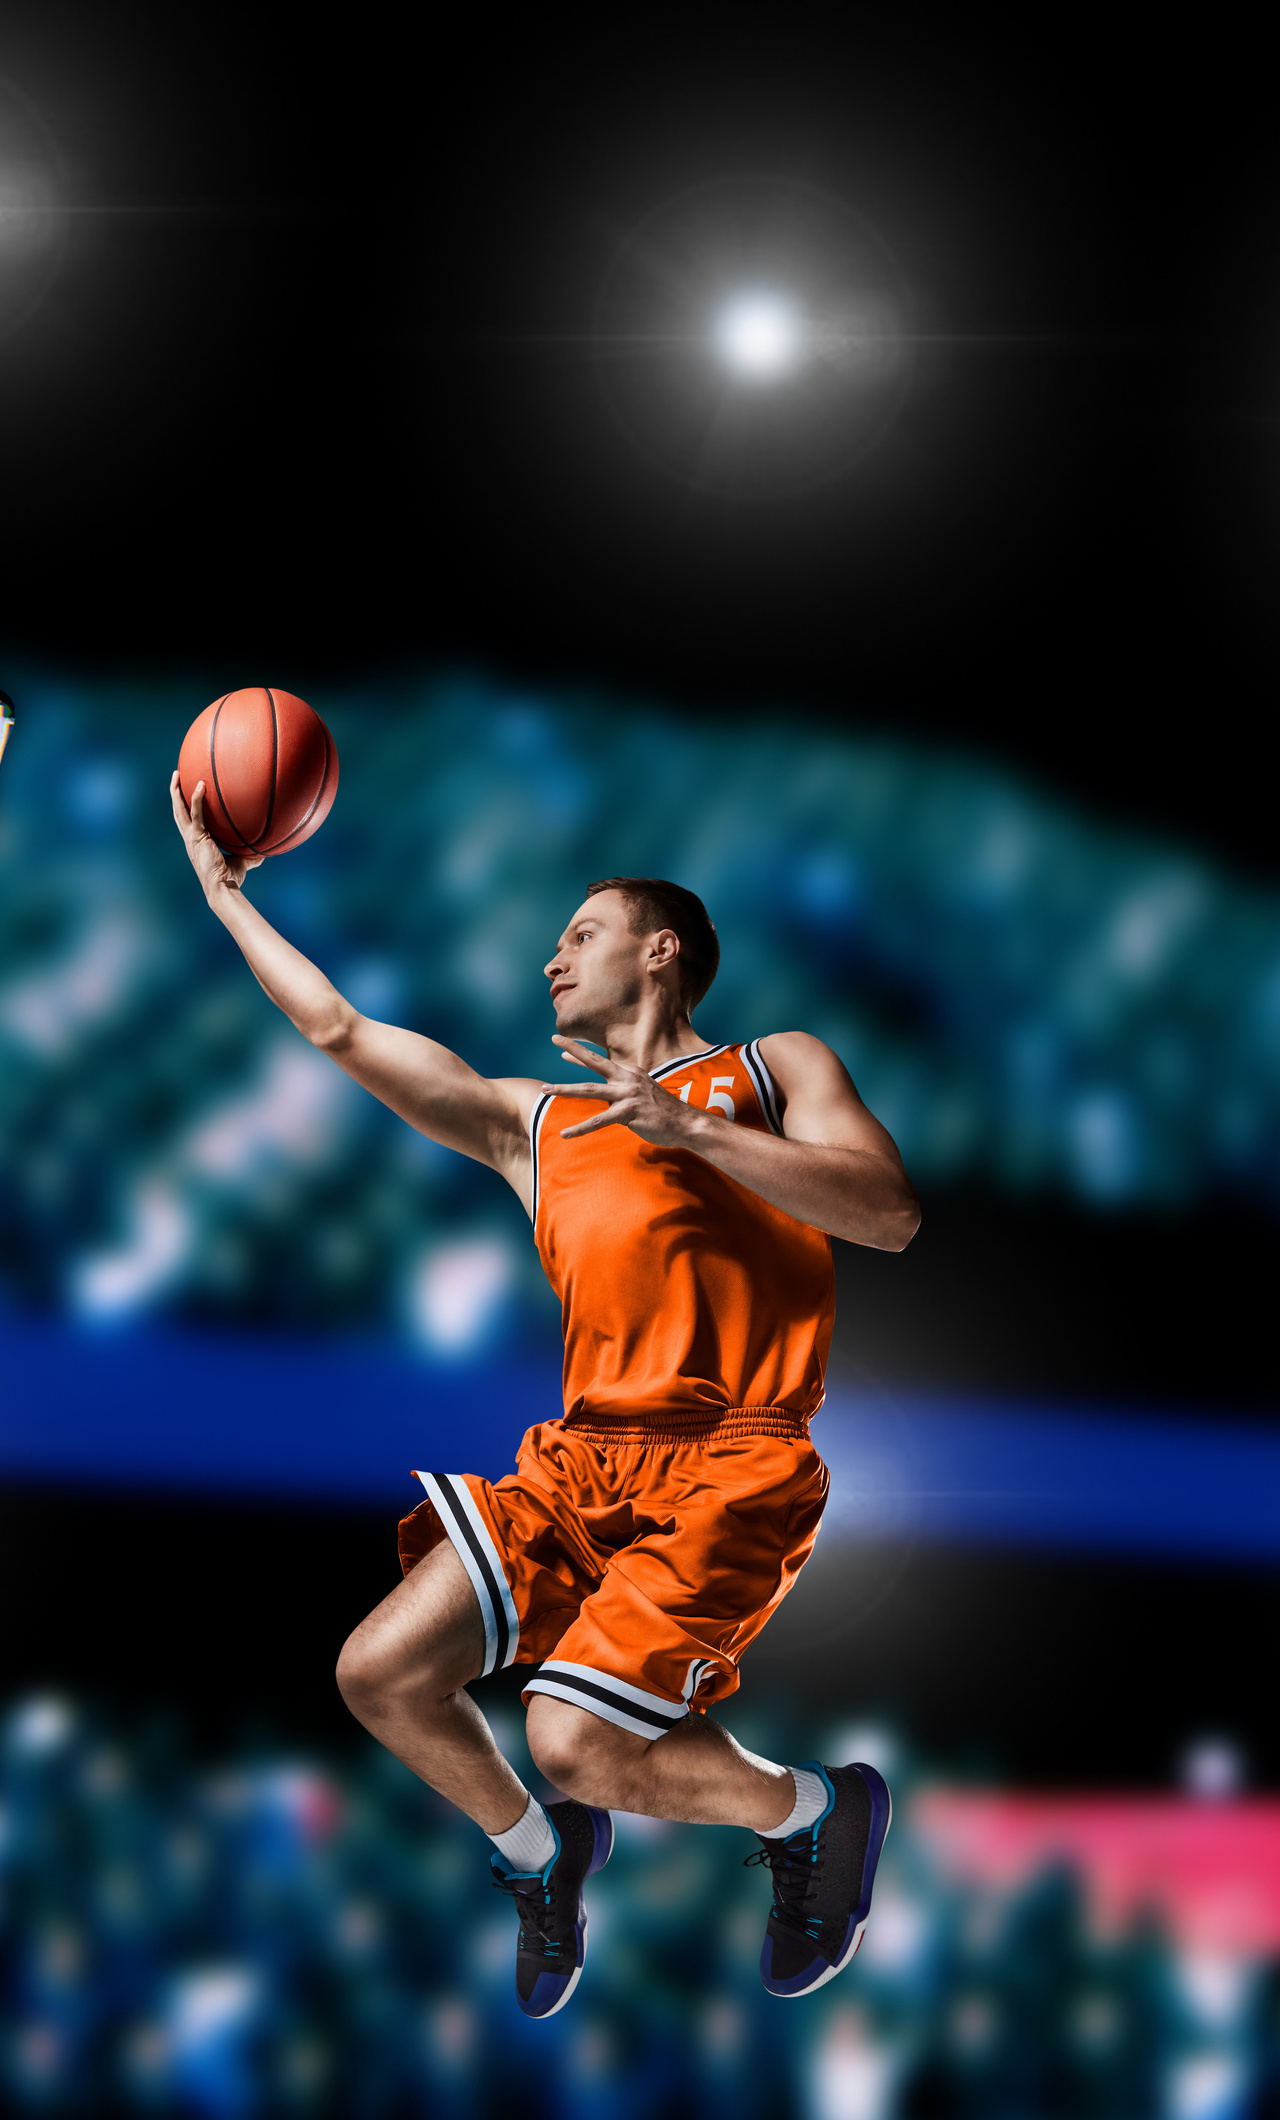 Basketball Player Shooting iPhone HD 4k Wallpaper, Image, Background, Photo and Picture